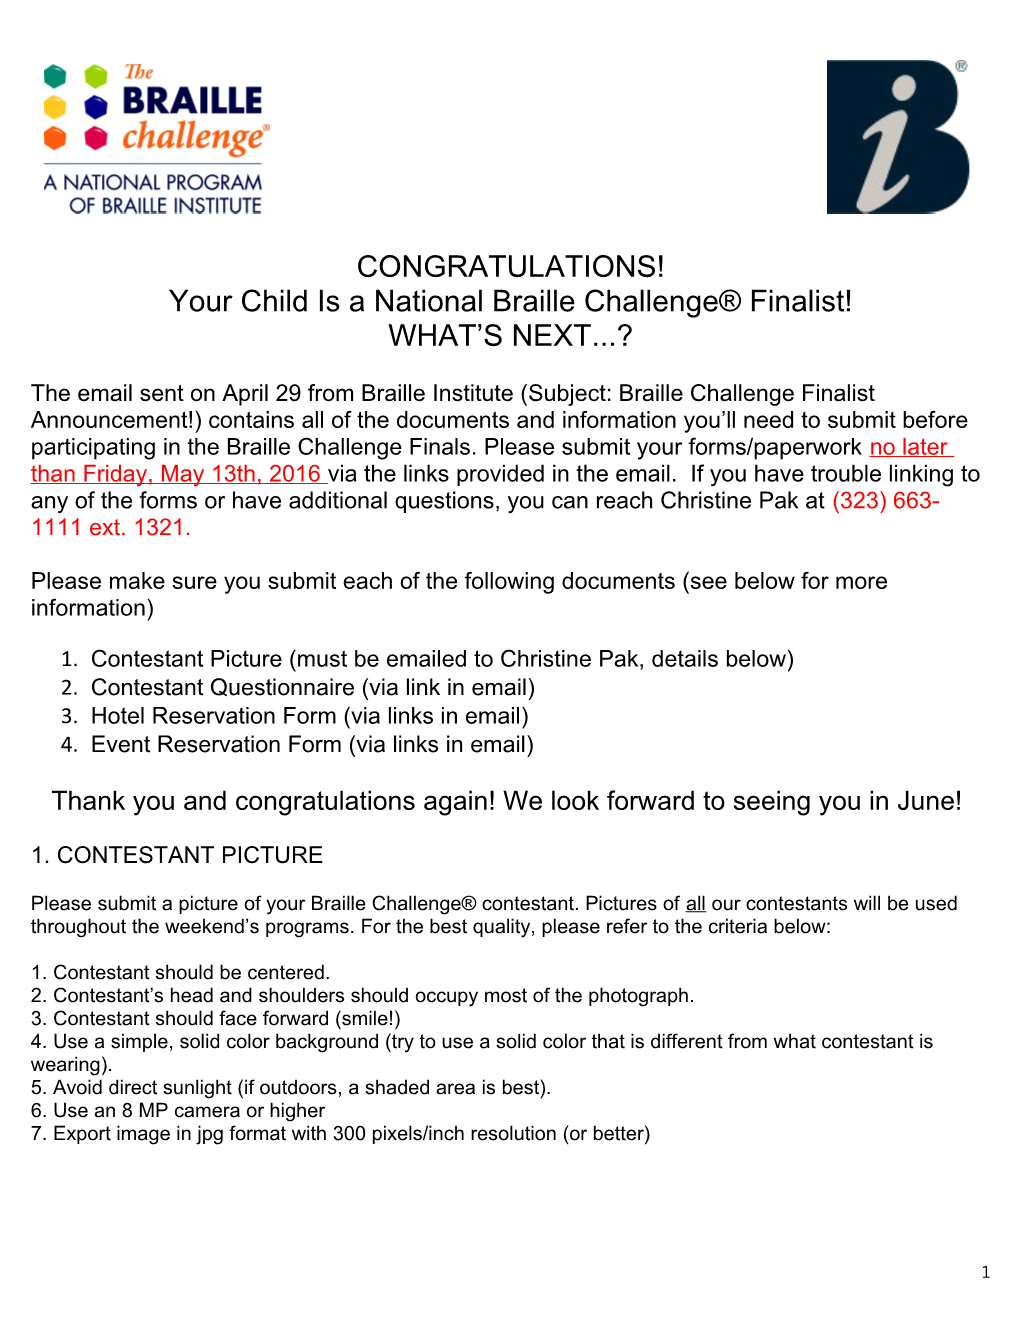 Your Child Is a National Braille Challenge Finalist!